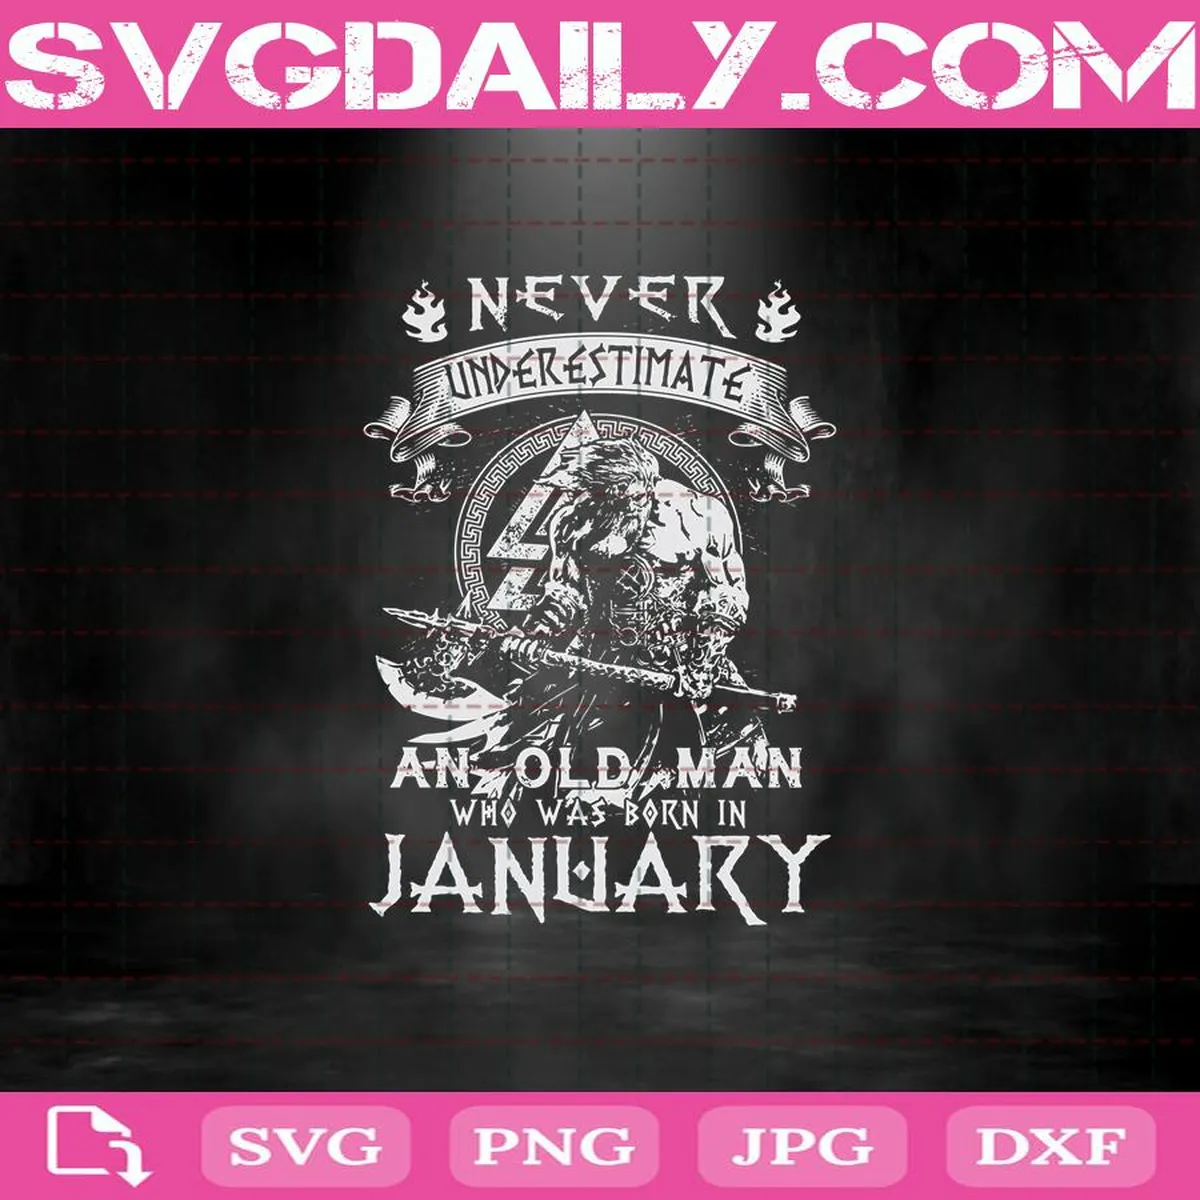 Never Underestimate An Old Man Who Was Born In January Svg, An Old Man Svg, Born In January Svg, January Svg, Birthday Svg